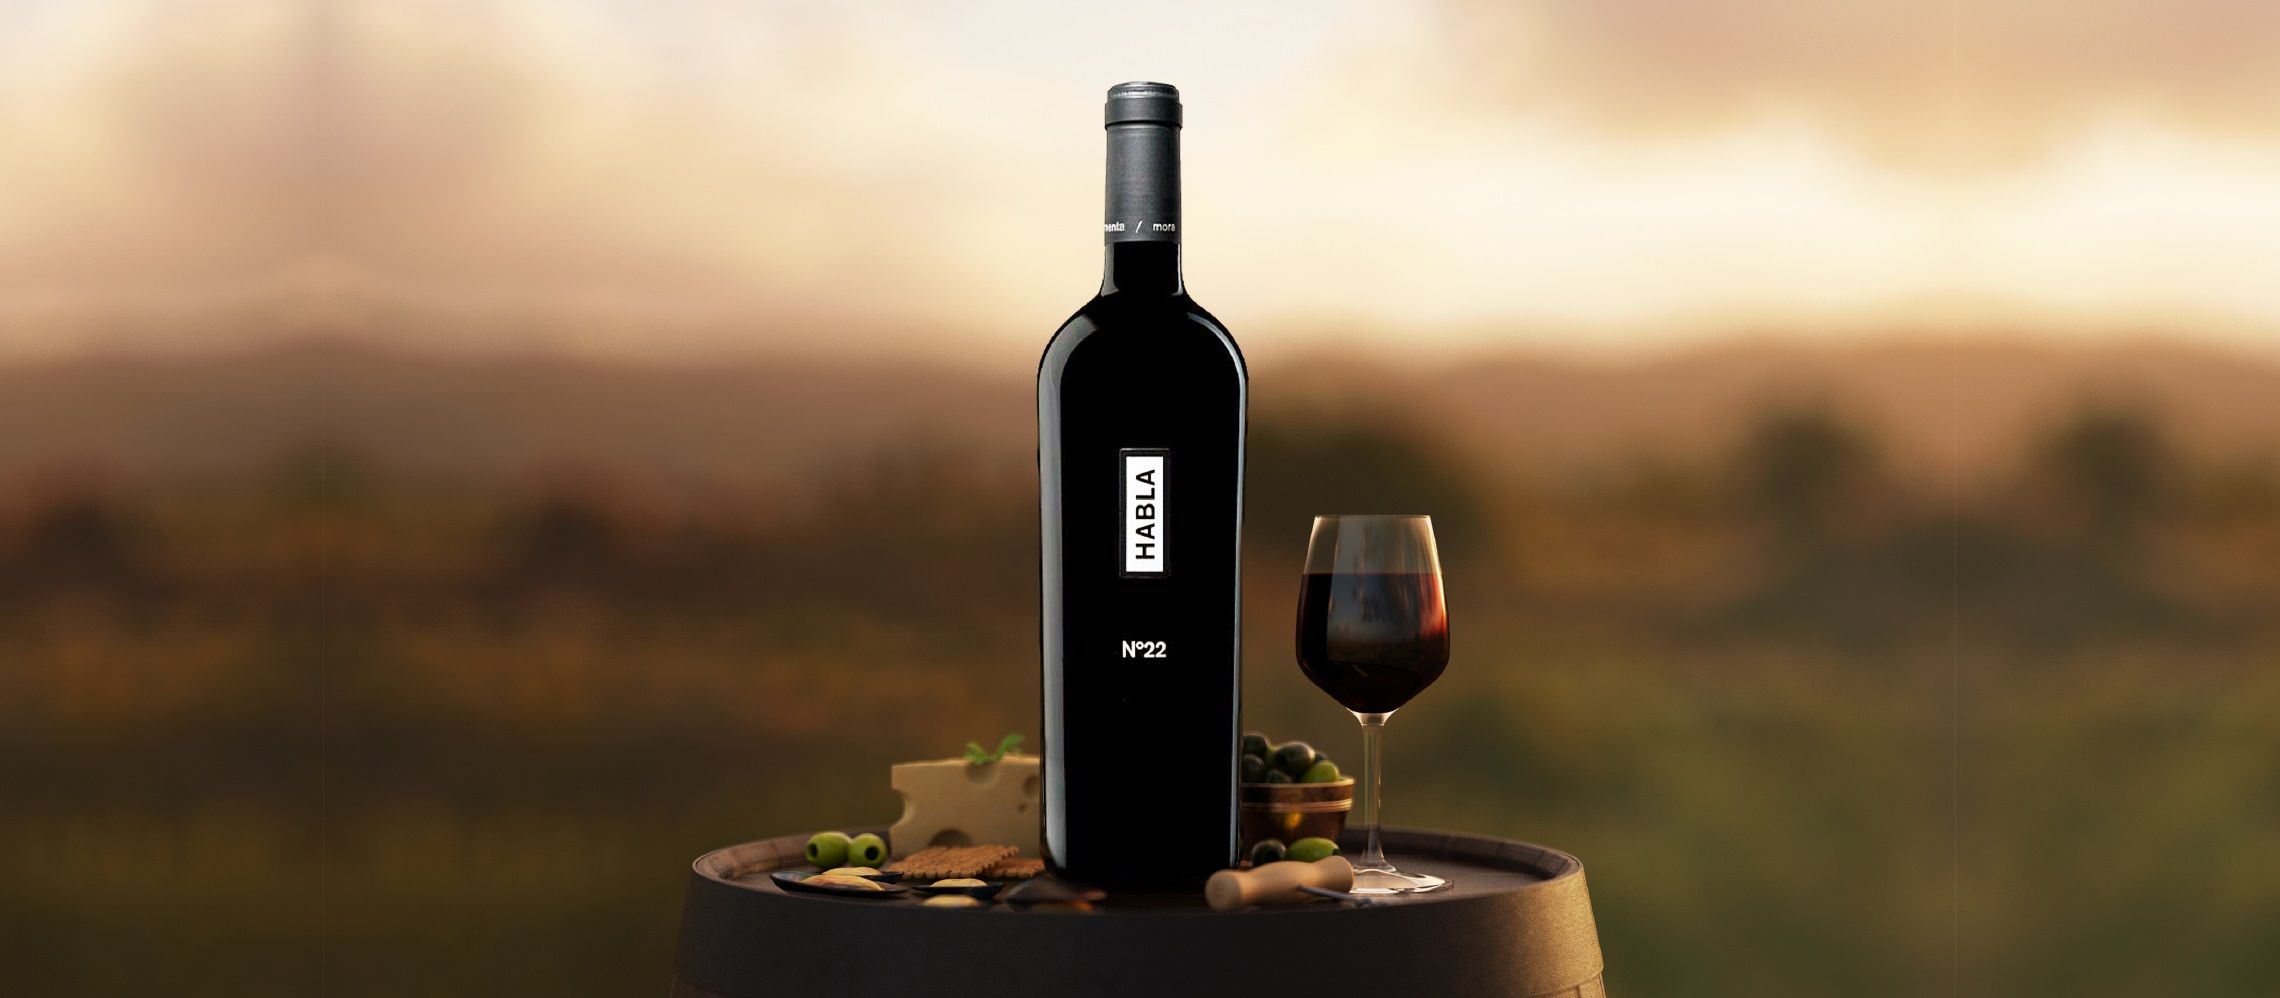 Photo for: Habla Nº22 Wins Best Value Award At The 2021 London Wine Competition